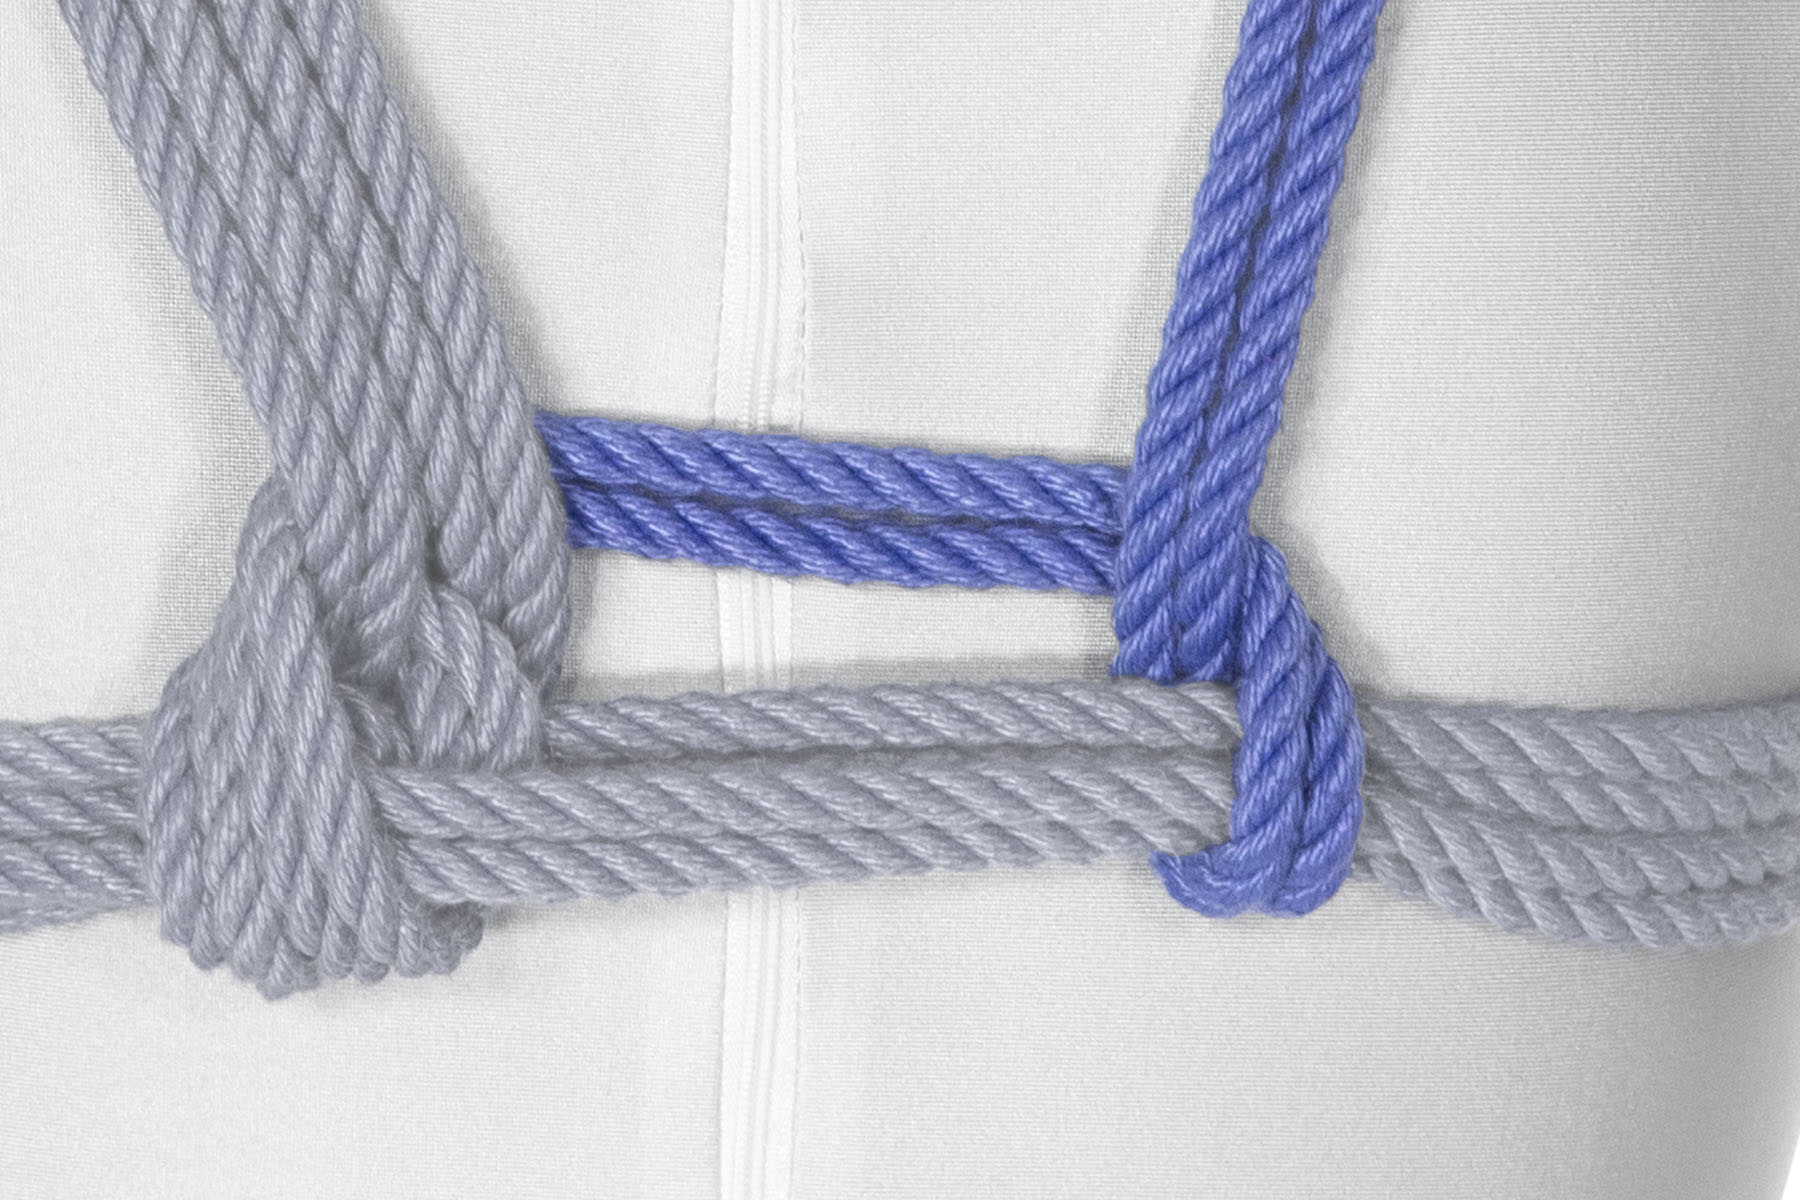 The rope goes three inches to the right of the spine, then makes a 90 degree turn over the chest wraps. It doubles back under the chest wraps and crosses over itself. The left and right of the harness are now symmetrical, with matching crossing structures a few inches on either side of the spine.